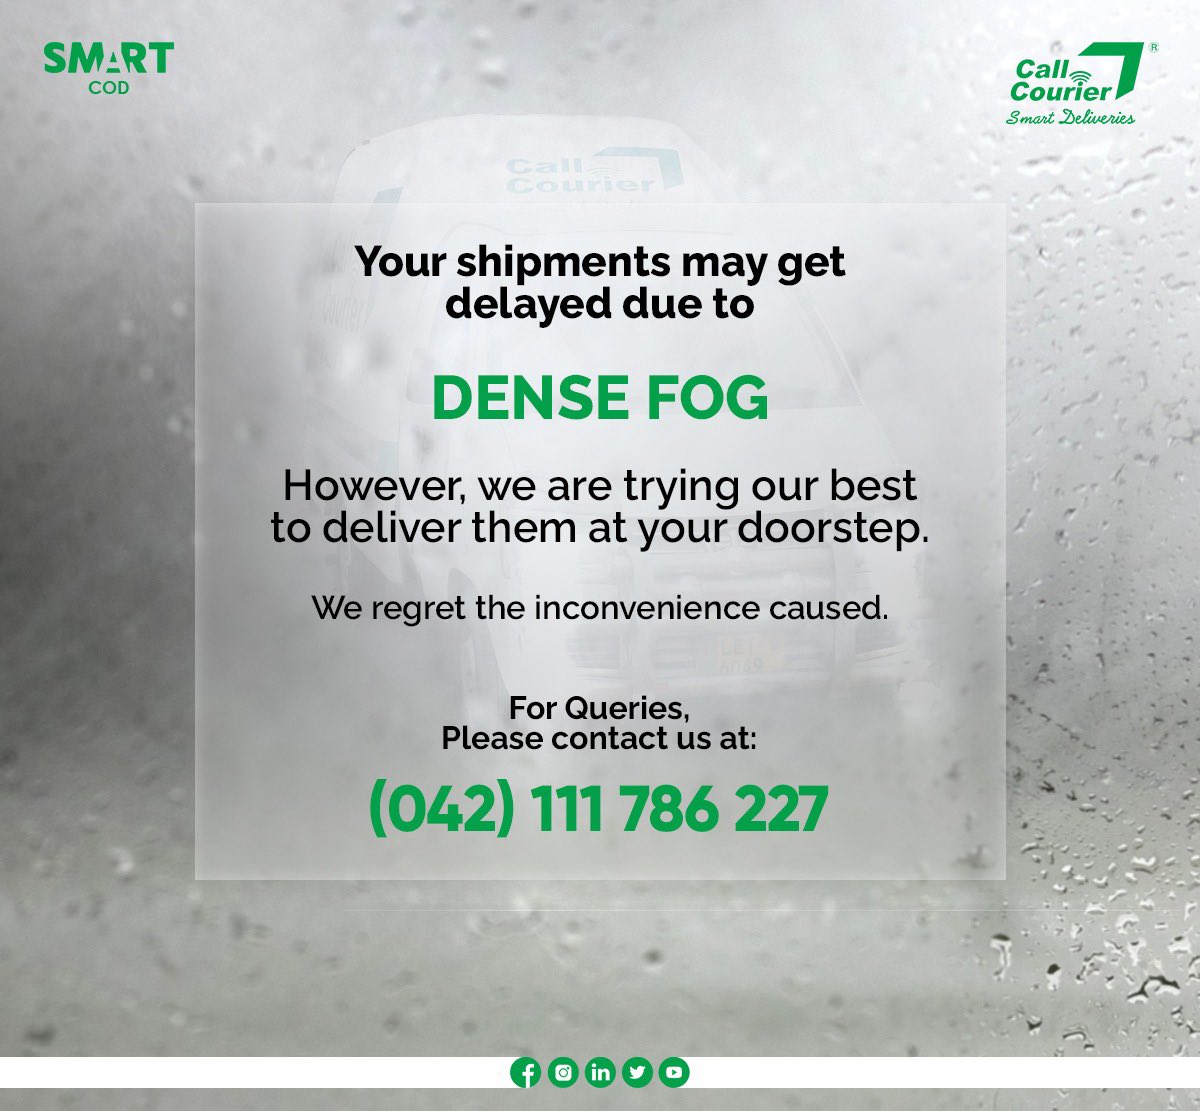 We are sorry to inform you that deliveries may get delayed due to worsening fog conditions. We thank you for your cooperation. #CallCourier #SmartDeliveries #SmartCOD #Fog